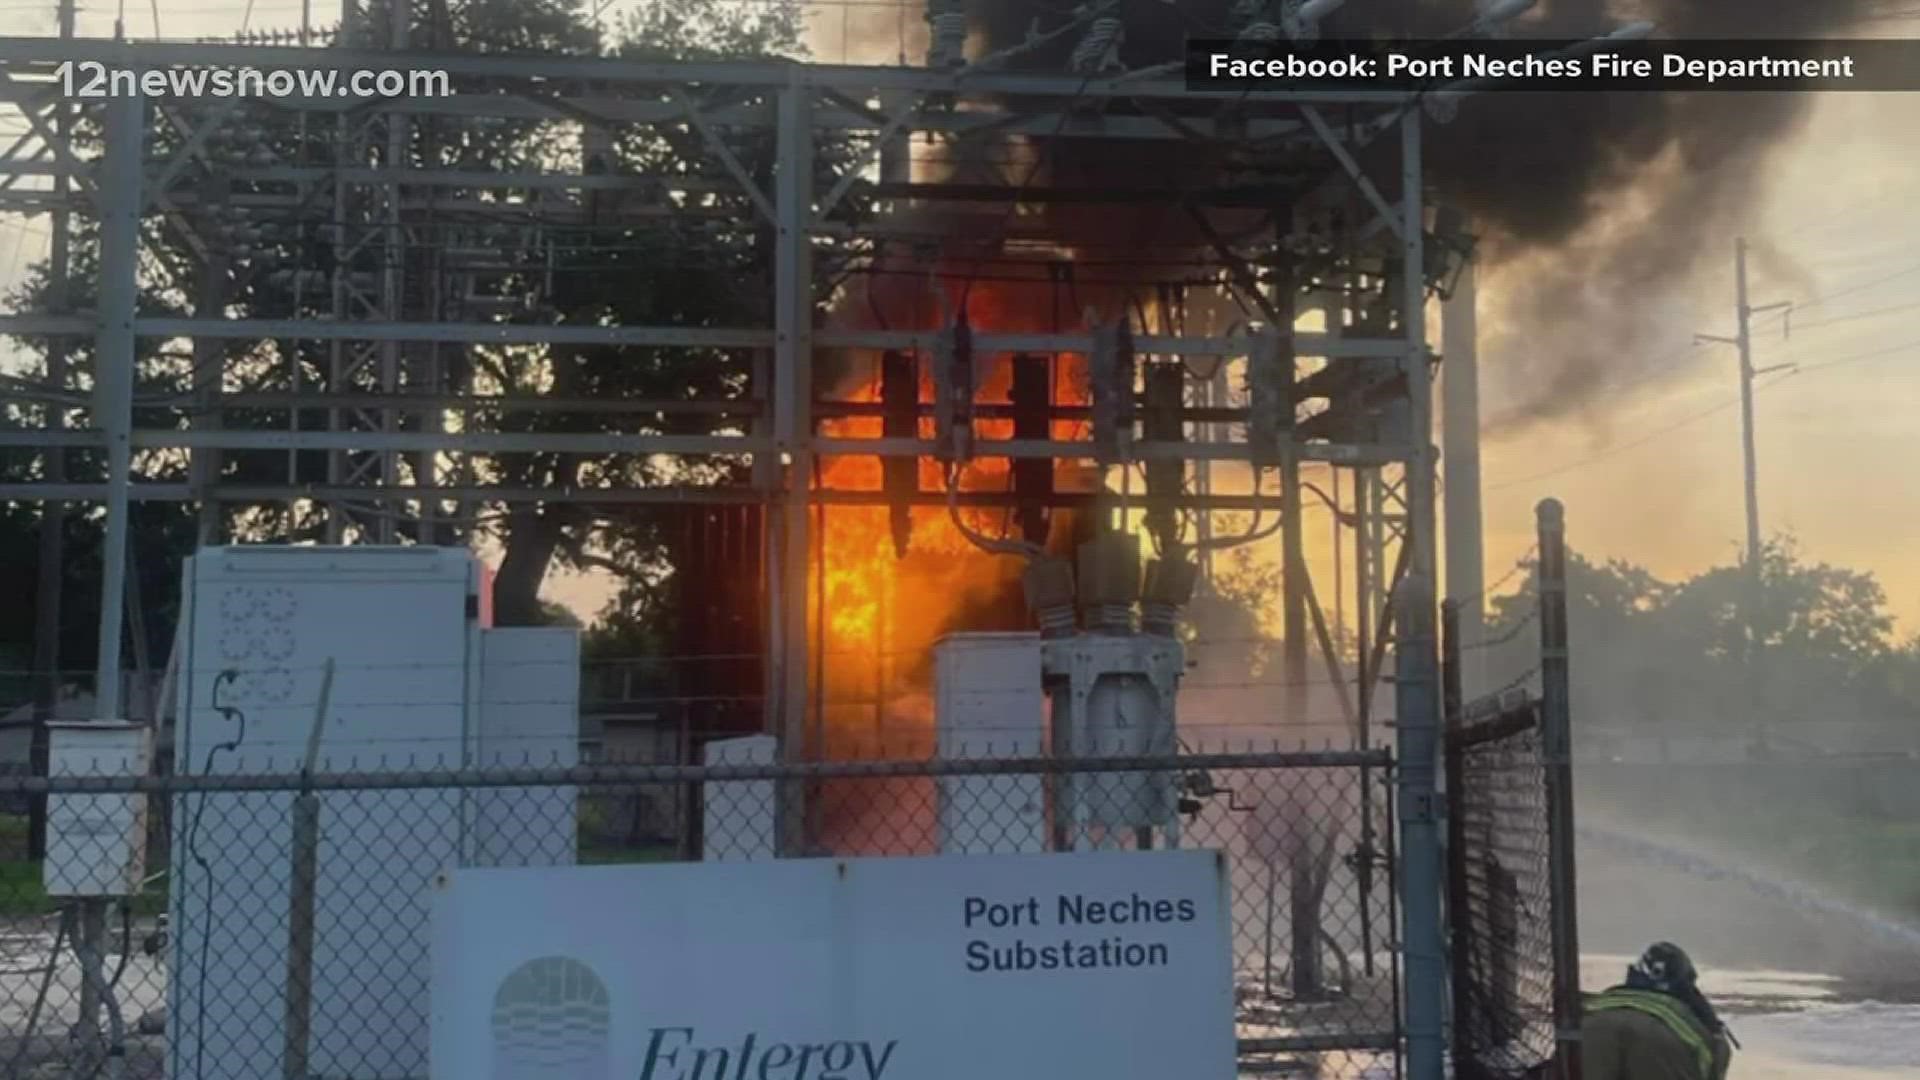 The Port Neches fire department says the fire is now contained.